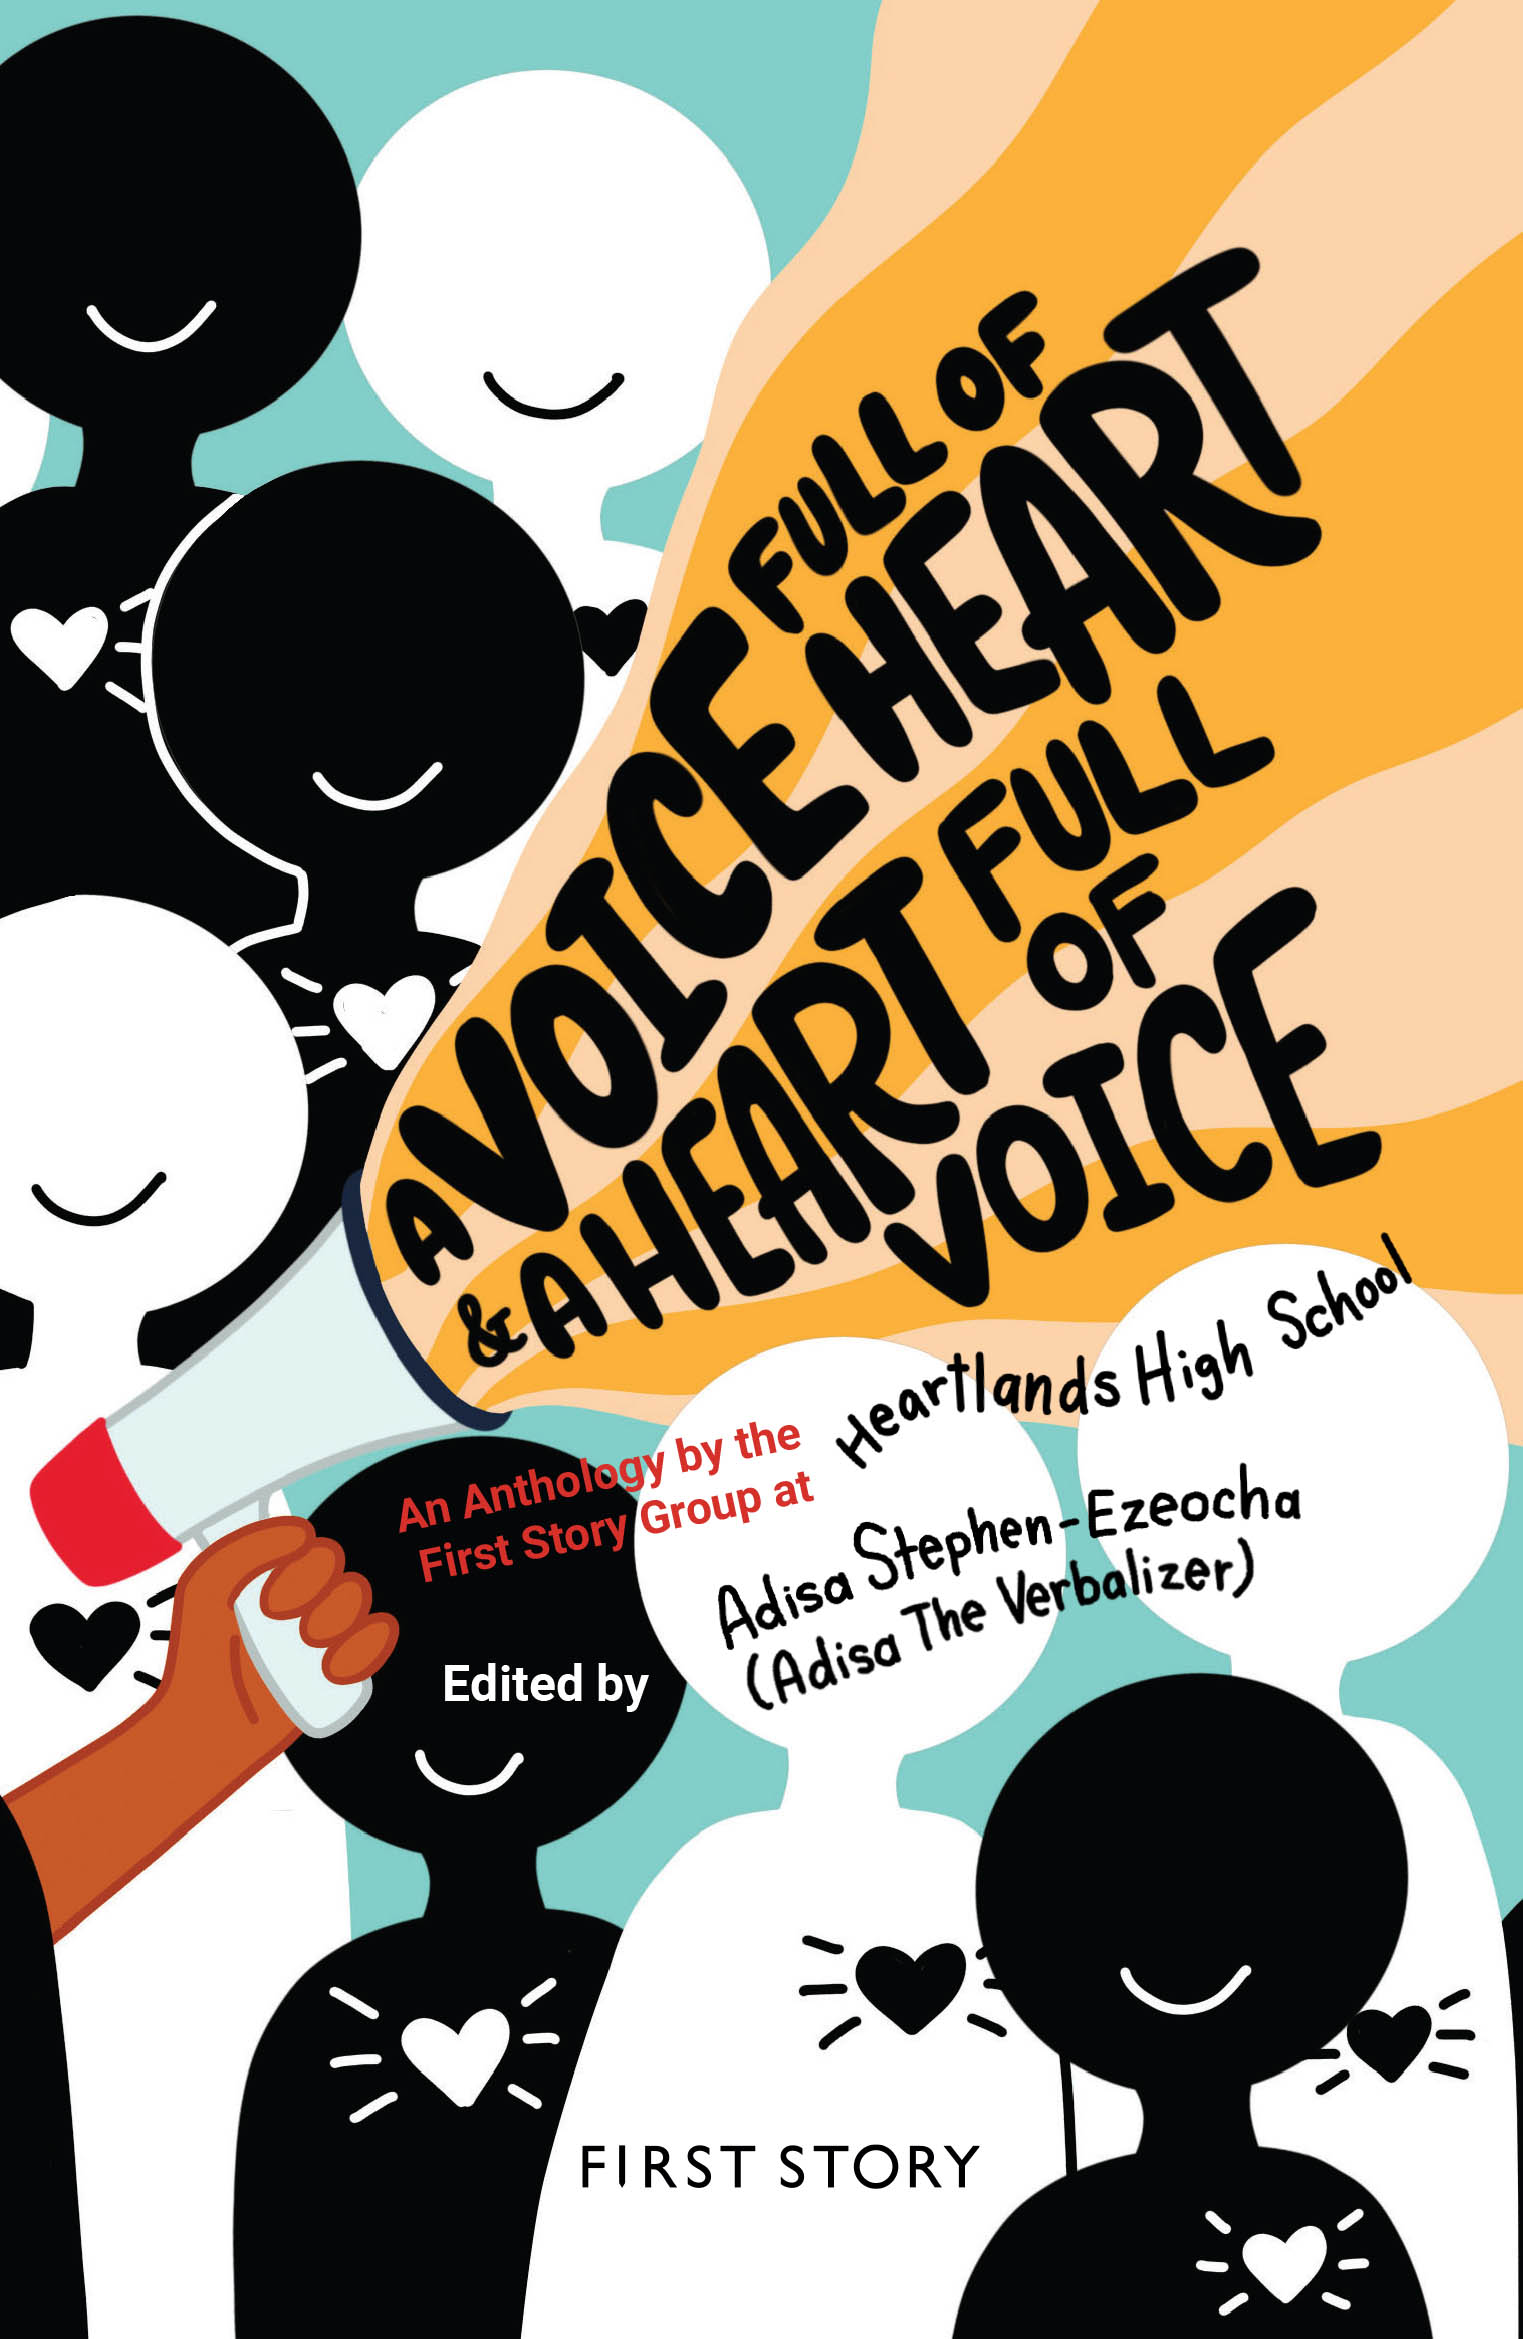 Cover of First Story Anthology for Heartlands High School, titled A Voice Full of Heart and a Heart Full of Voice